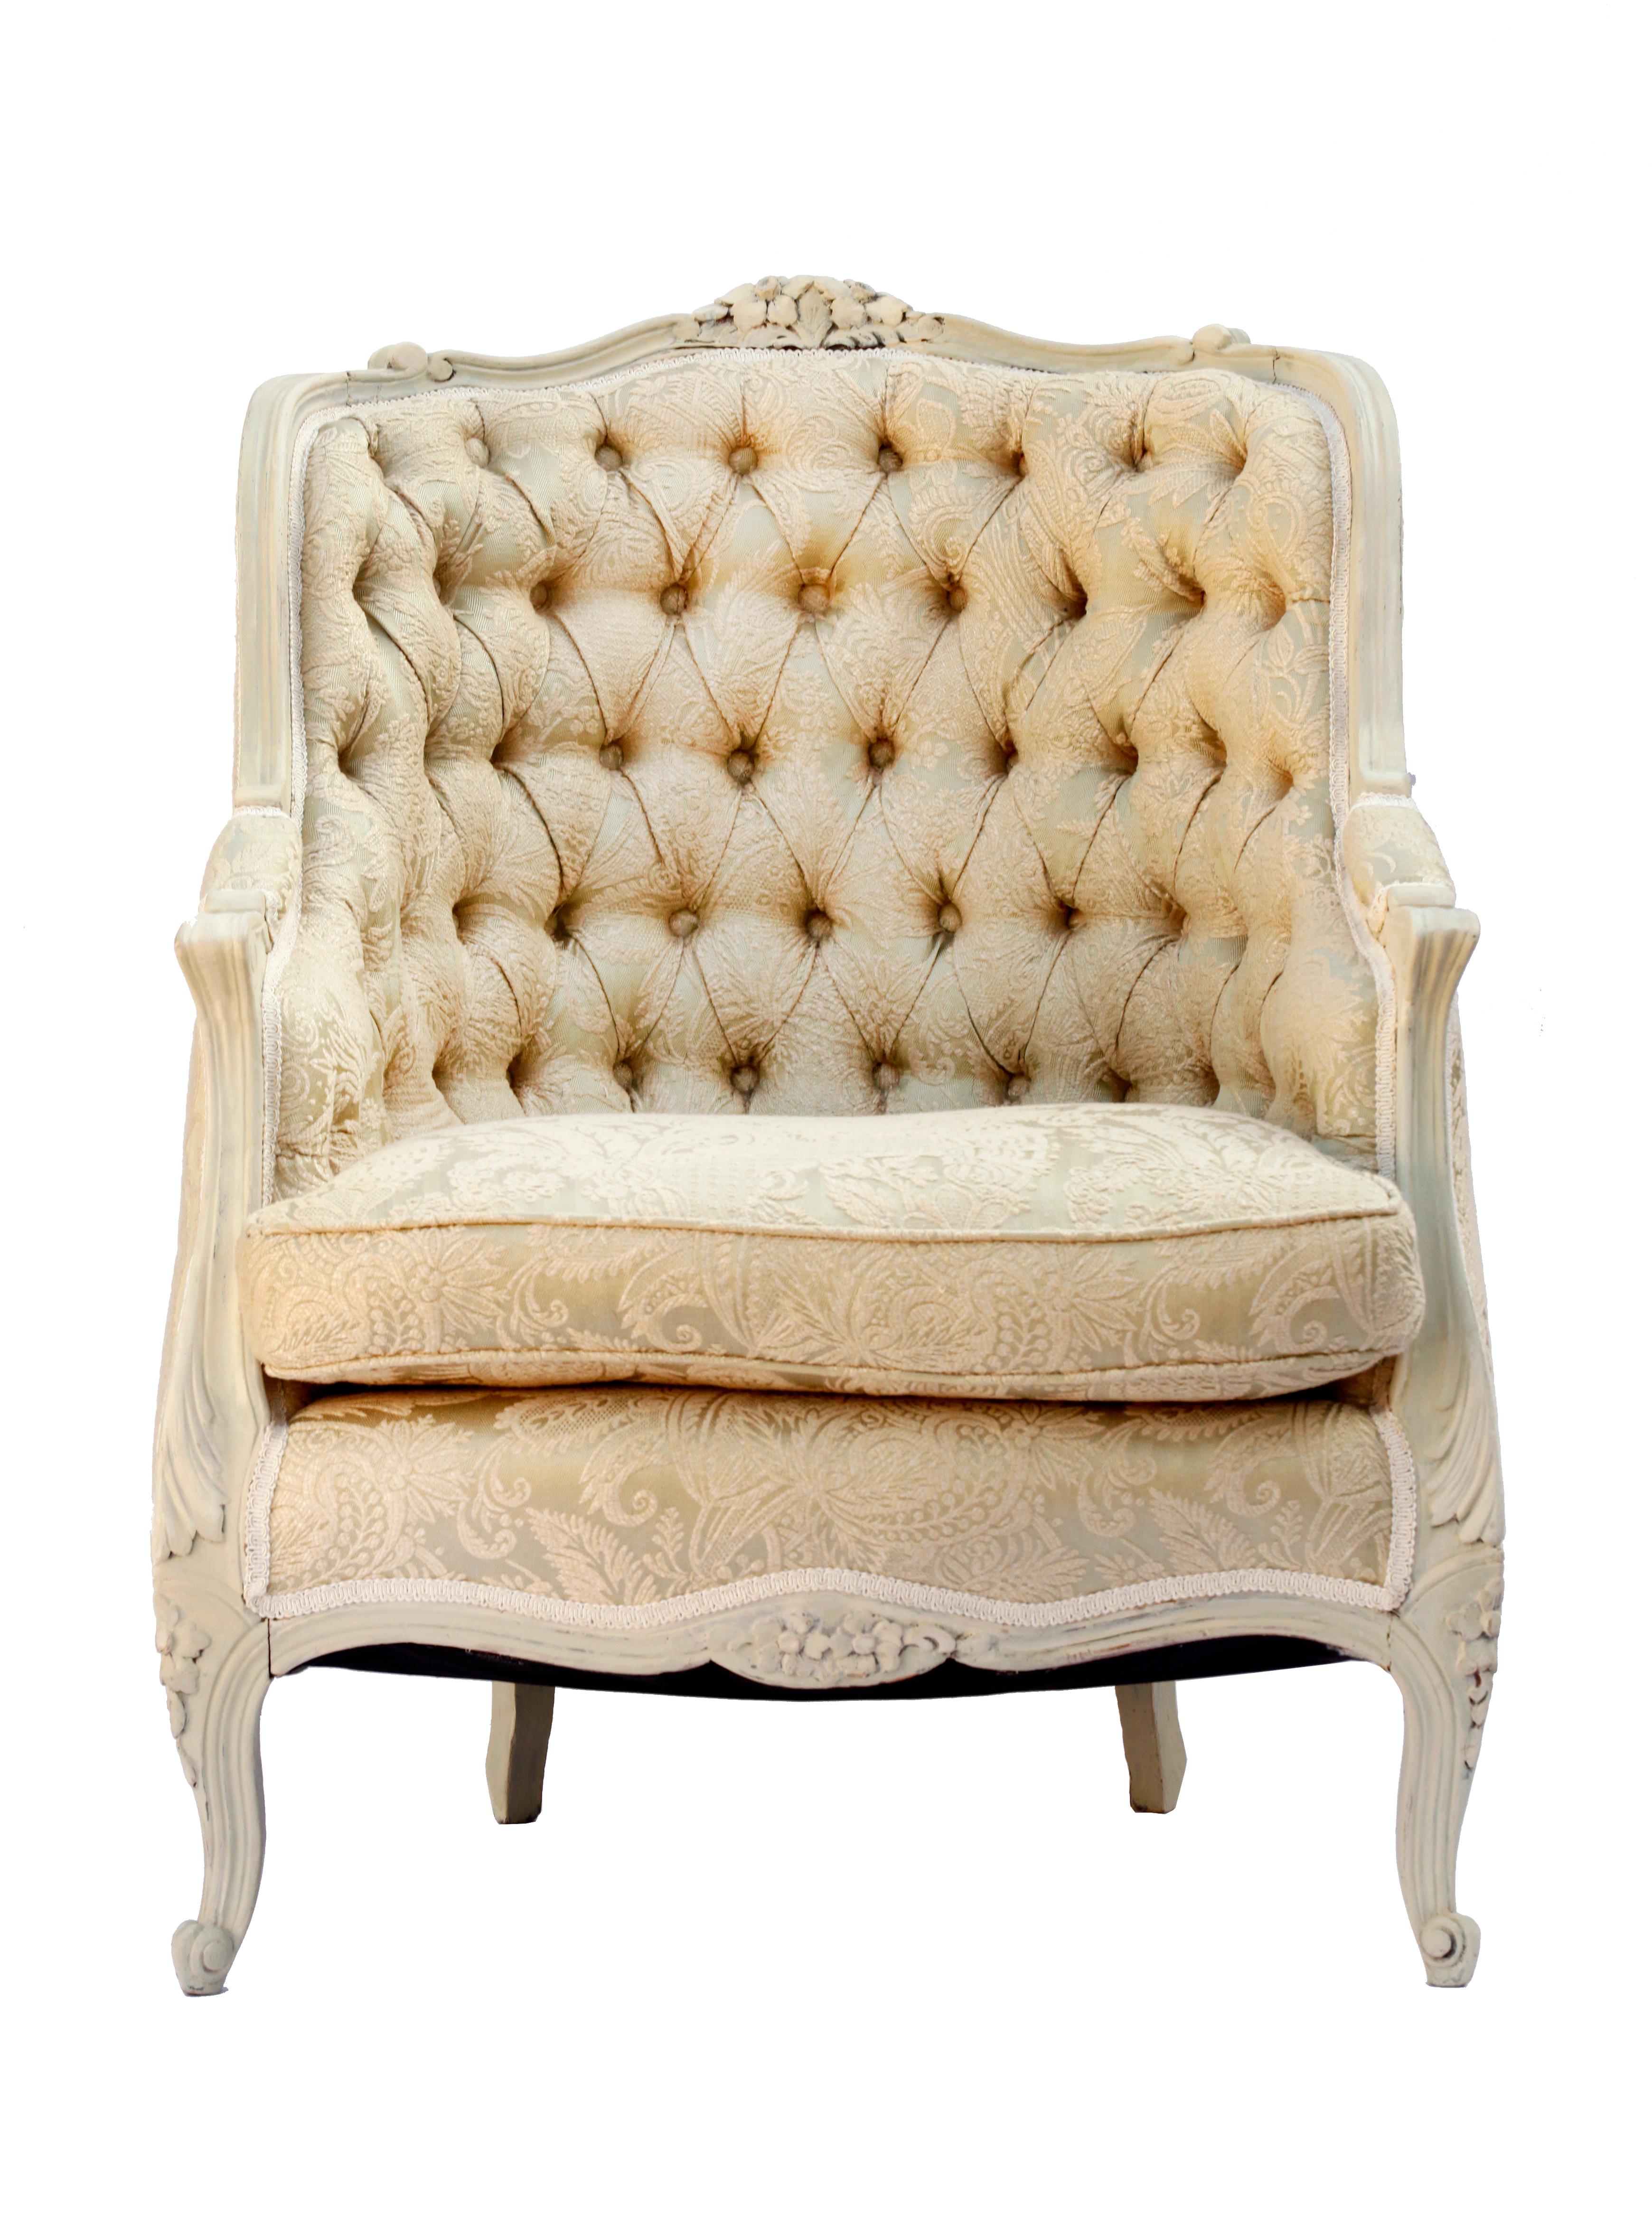 Early-20th Century/late 19th Century Italian bergère armchair in finely carved solid wood frame with hand carved floral accents, cabriole legs, comfortable tufted barrel back, upholstered in Clarence House silk.